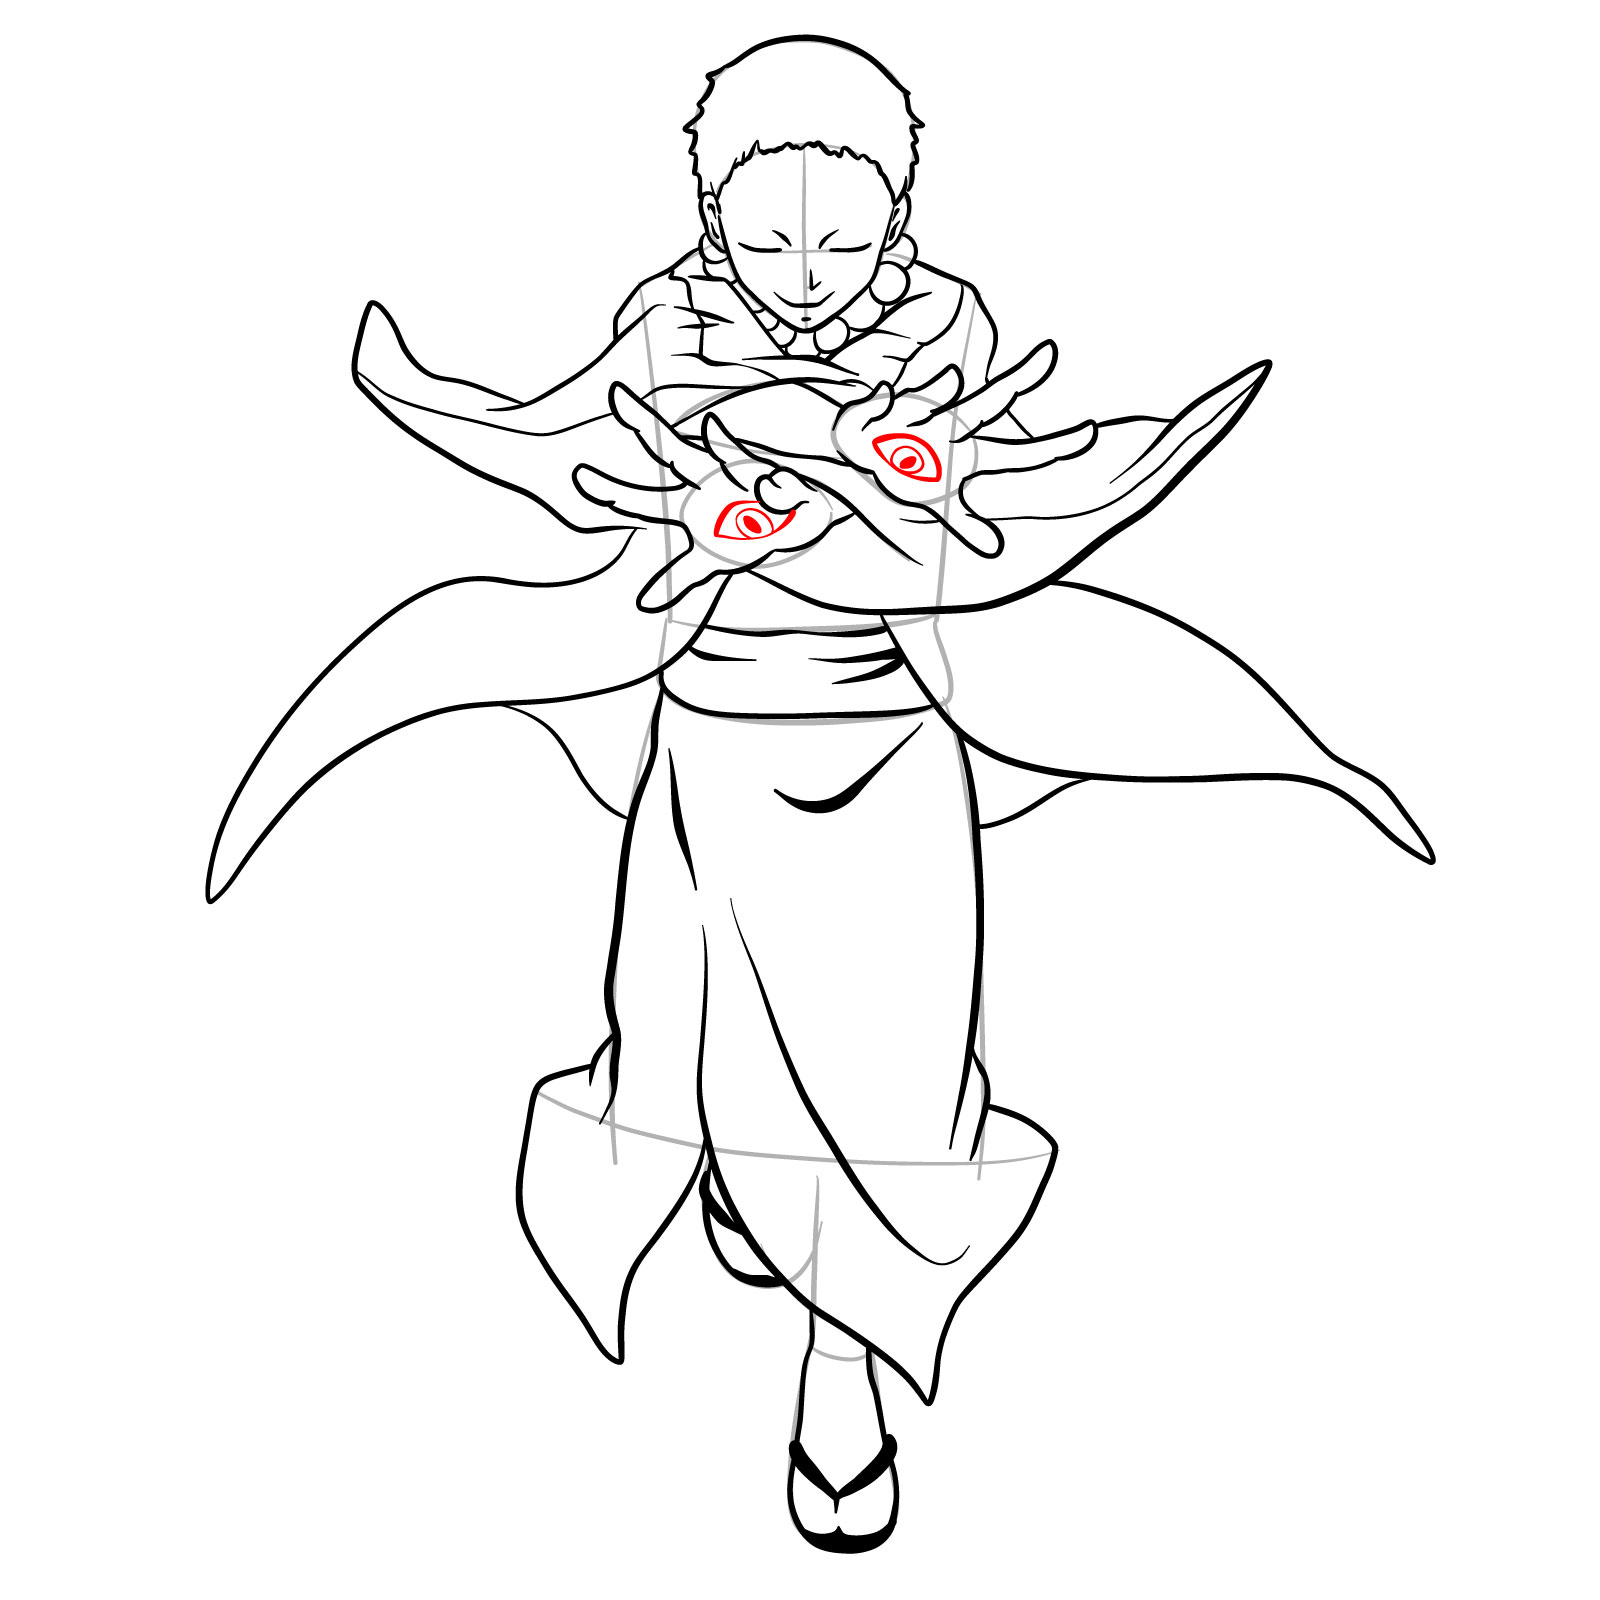 How to draw Yahaba from Demon Slayer - step 32